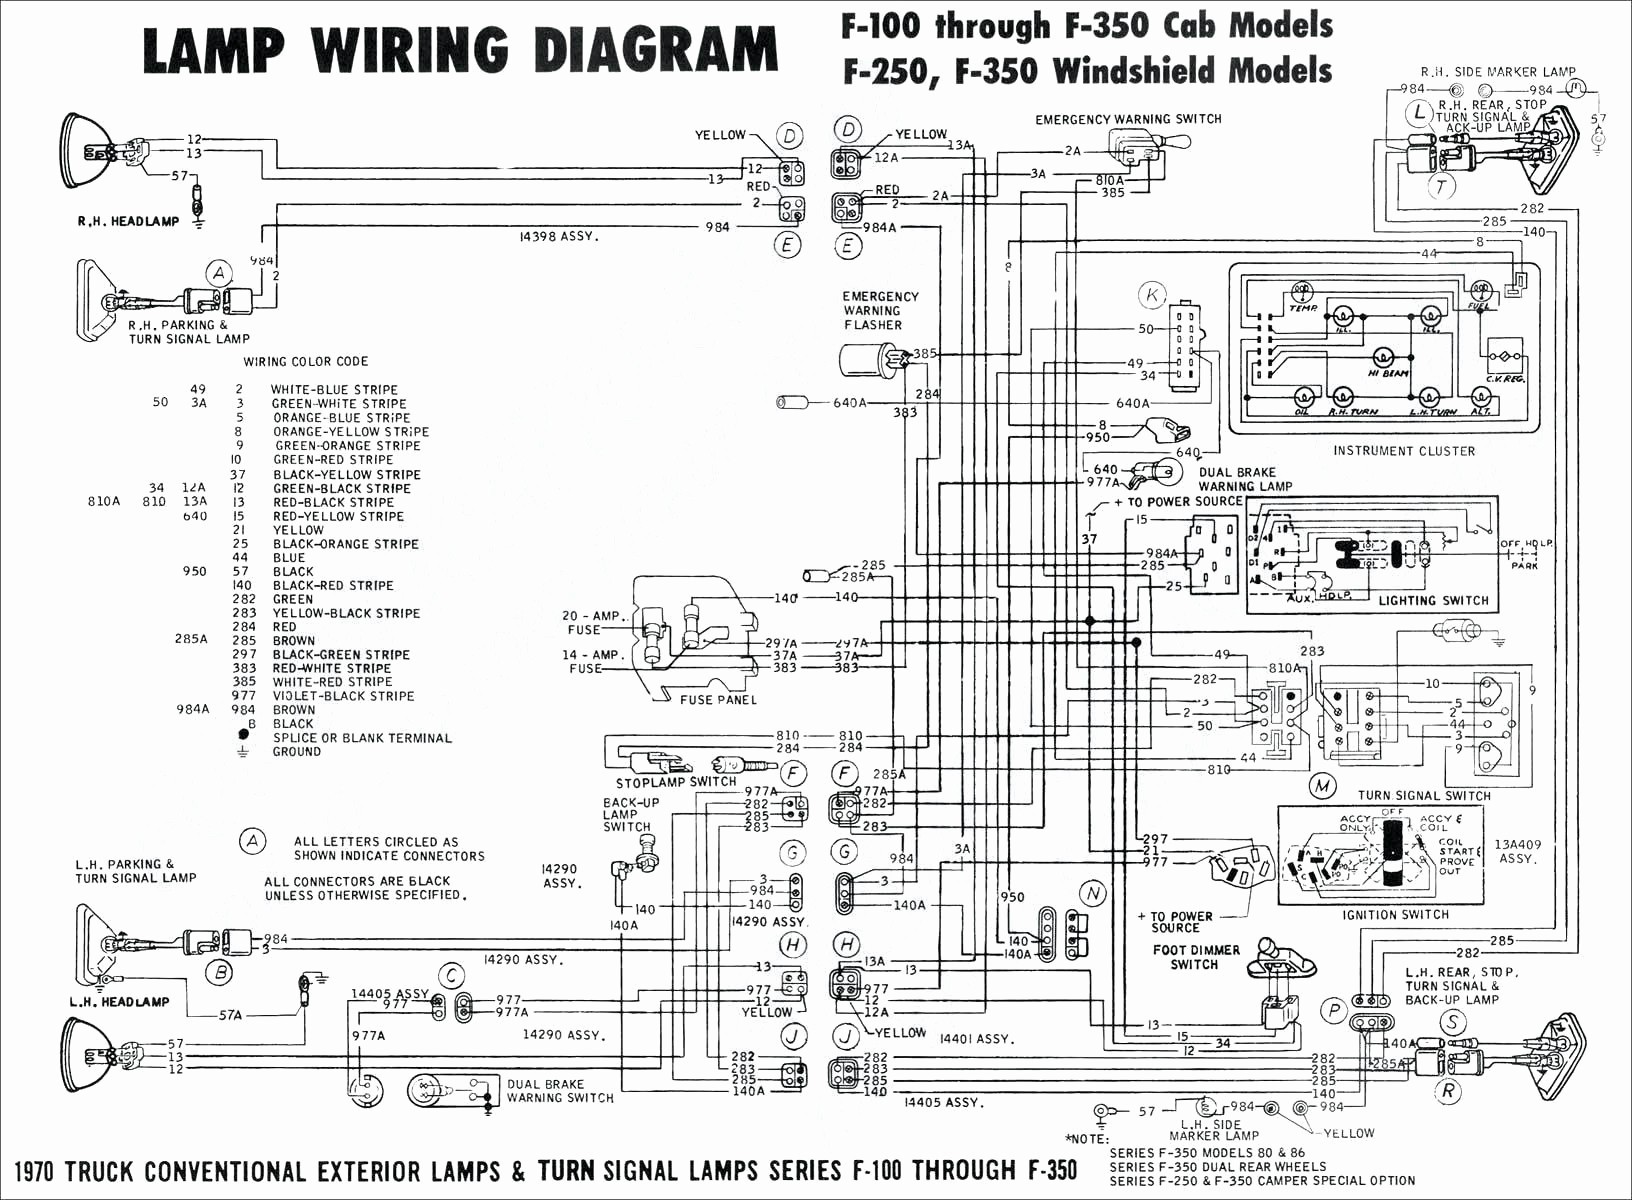 Ditch Witch Parts Diagram | My Wiring DIagram